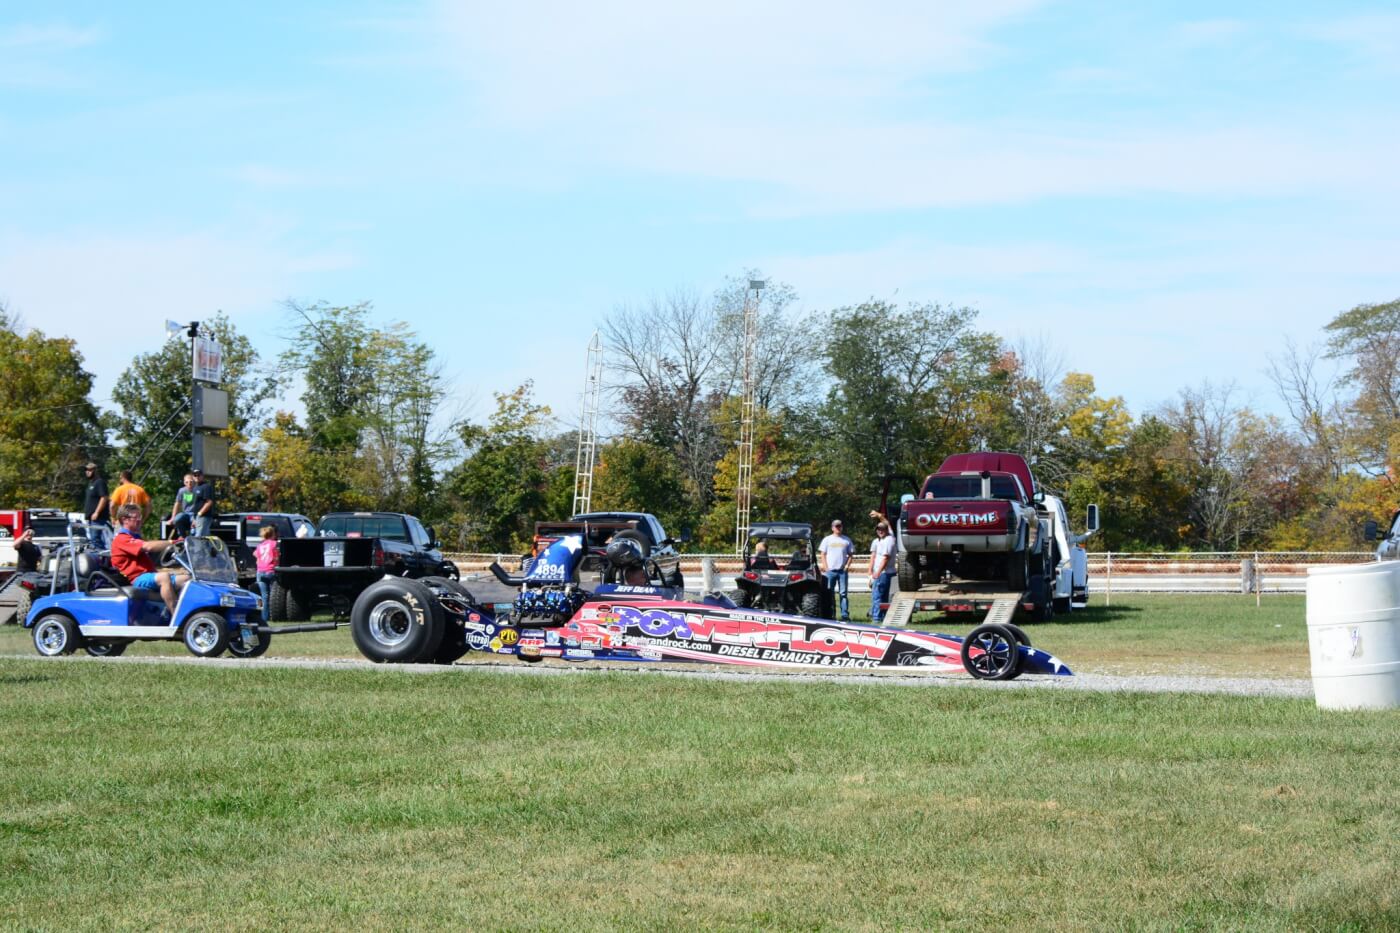 Jeff Dean with his Dmax rail ran some fast times on the quarter-mile track.